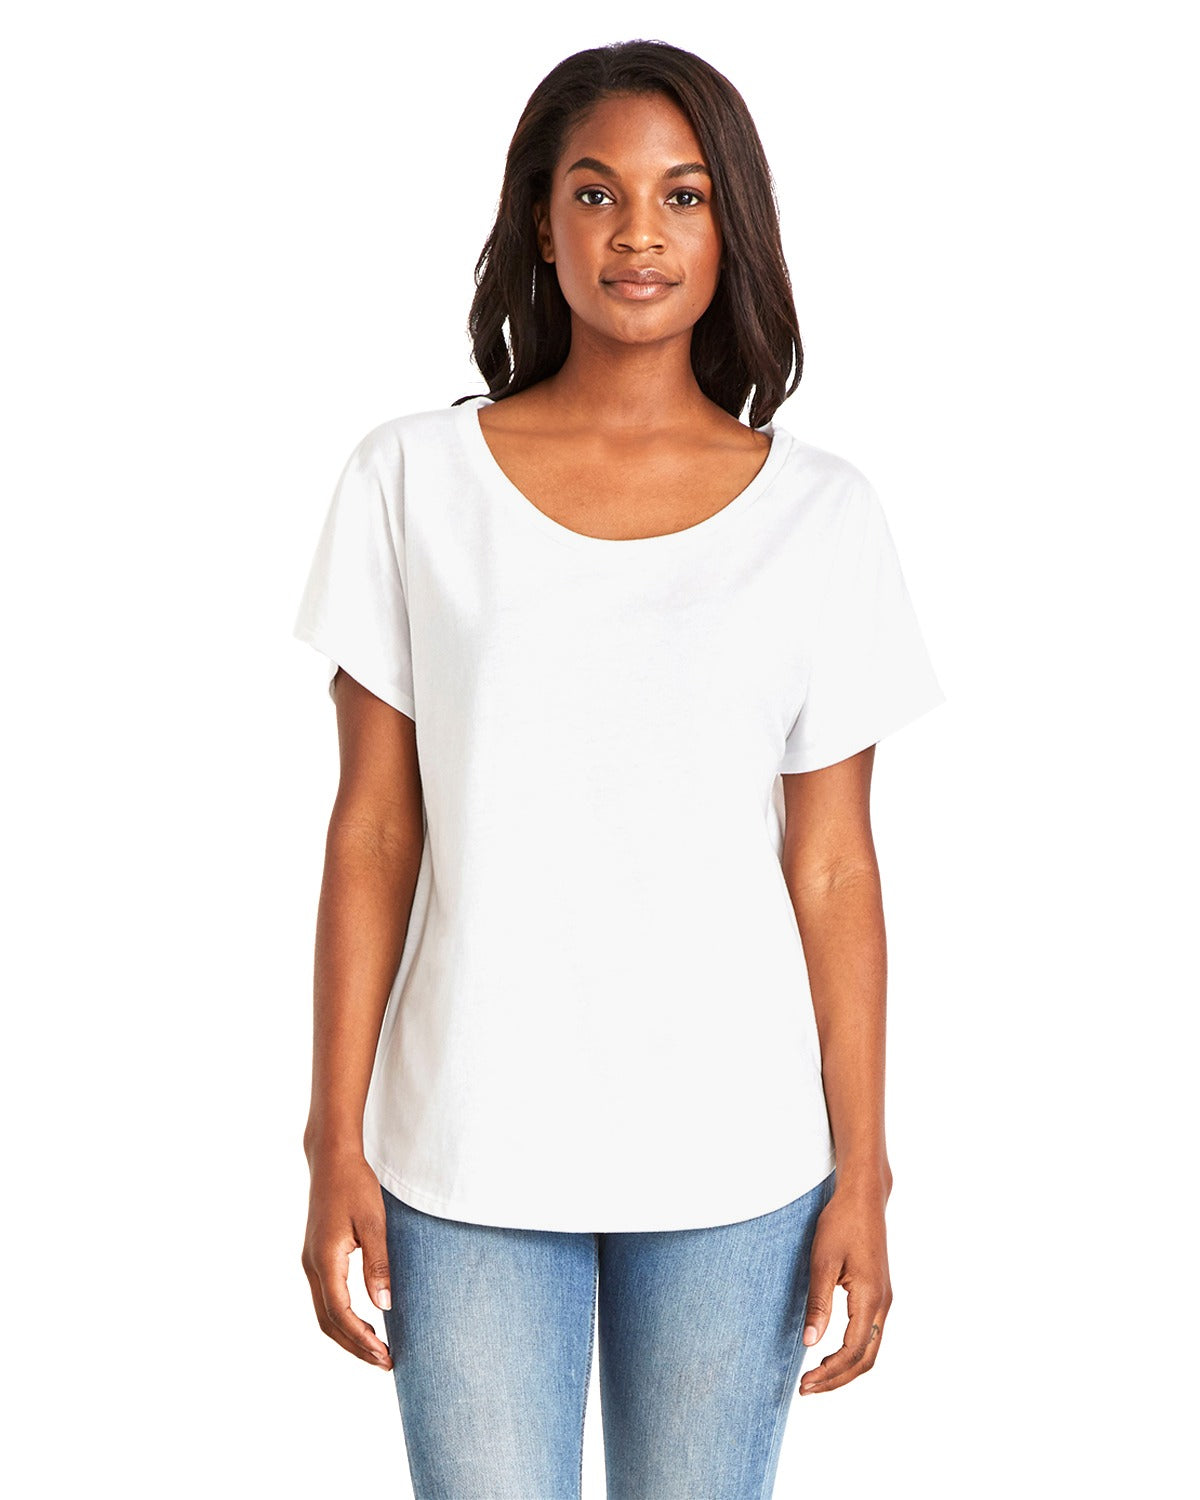 KritterXD Ladies' Dolman Relaxed Fit T-Shirt 1560